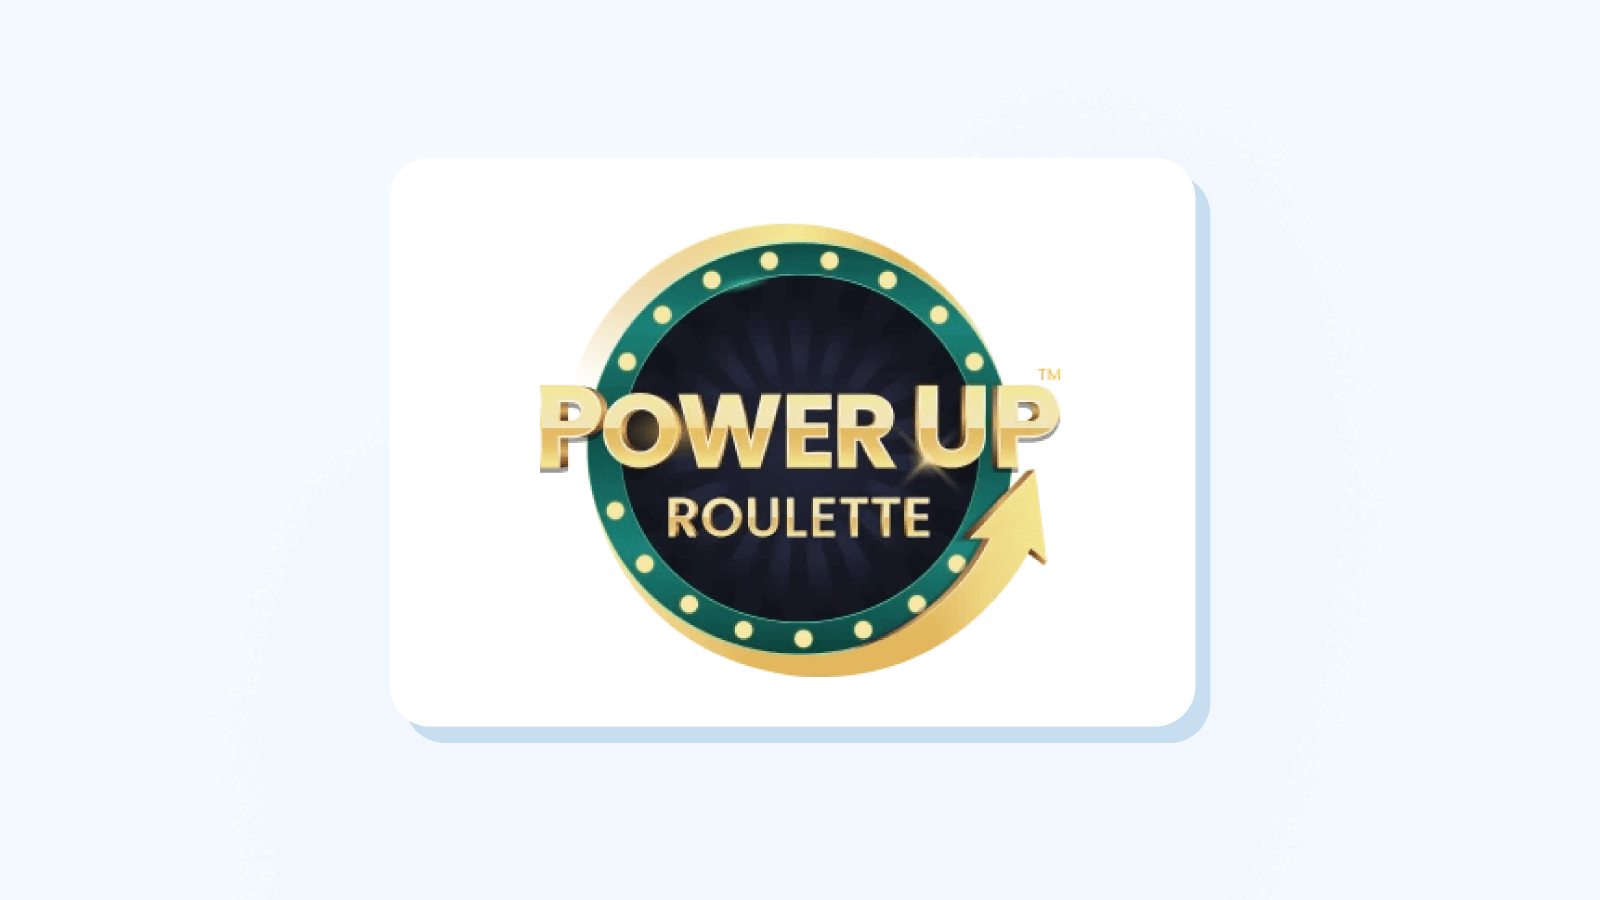 5.Live Power Up Roulette